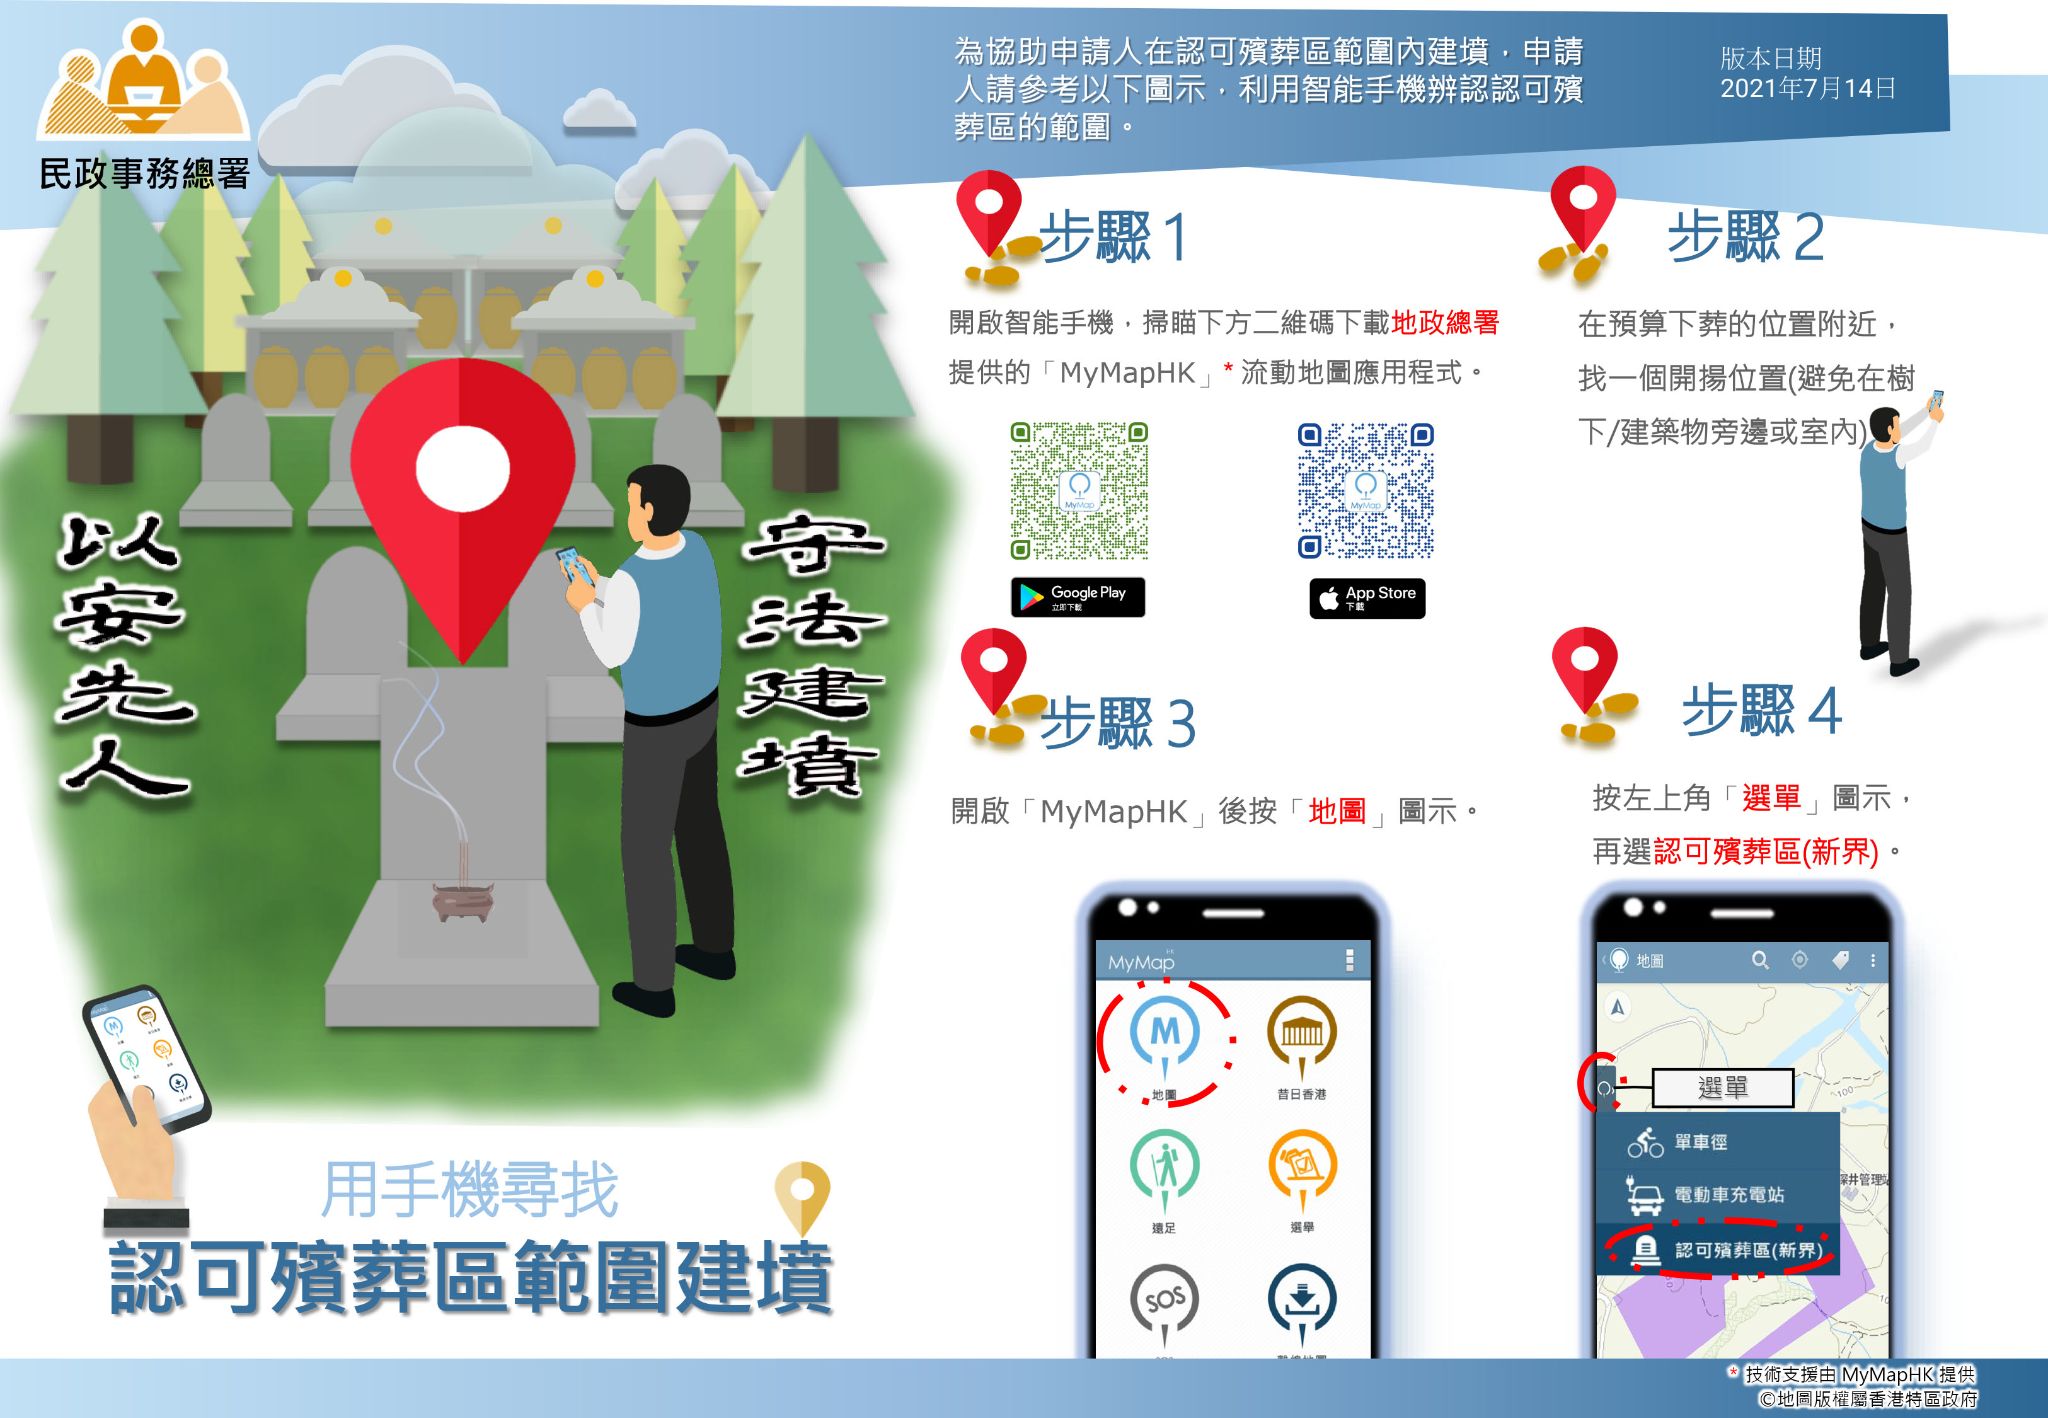 Guide to Identify the Boundaries of Permitted Burial Grounds with a Mobile App (Chinese Only)